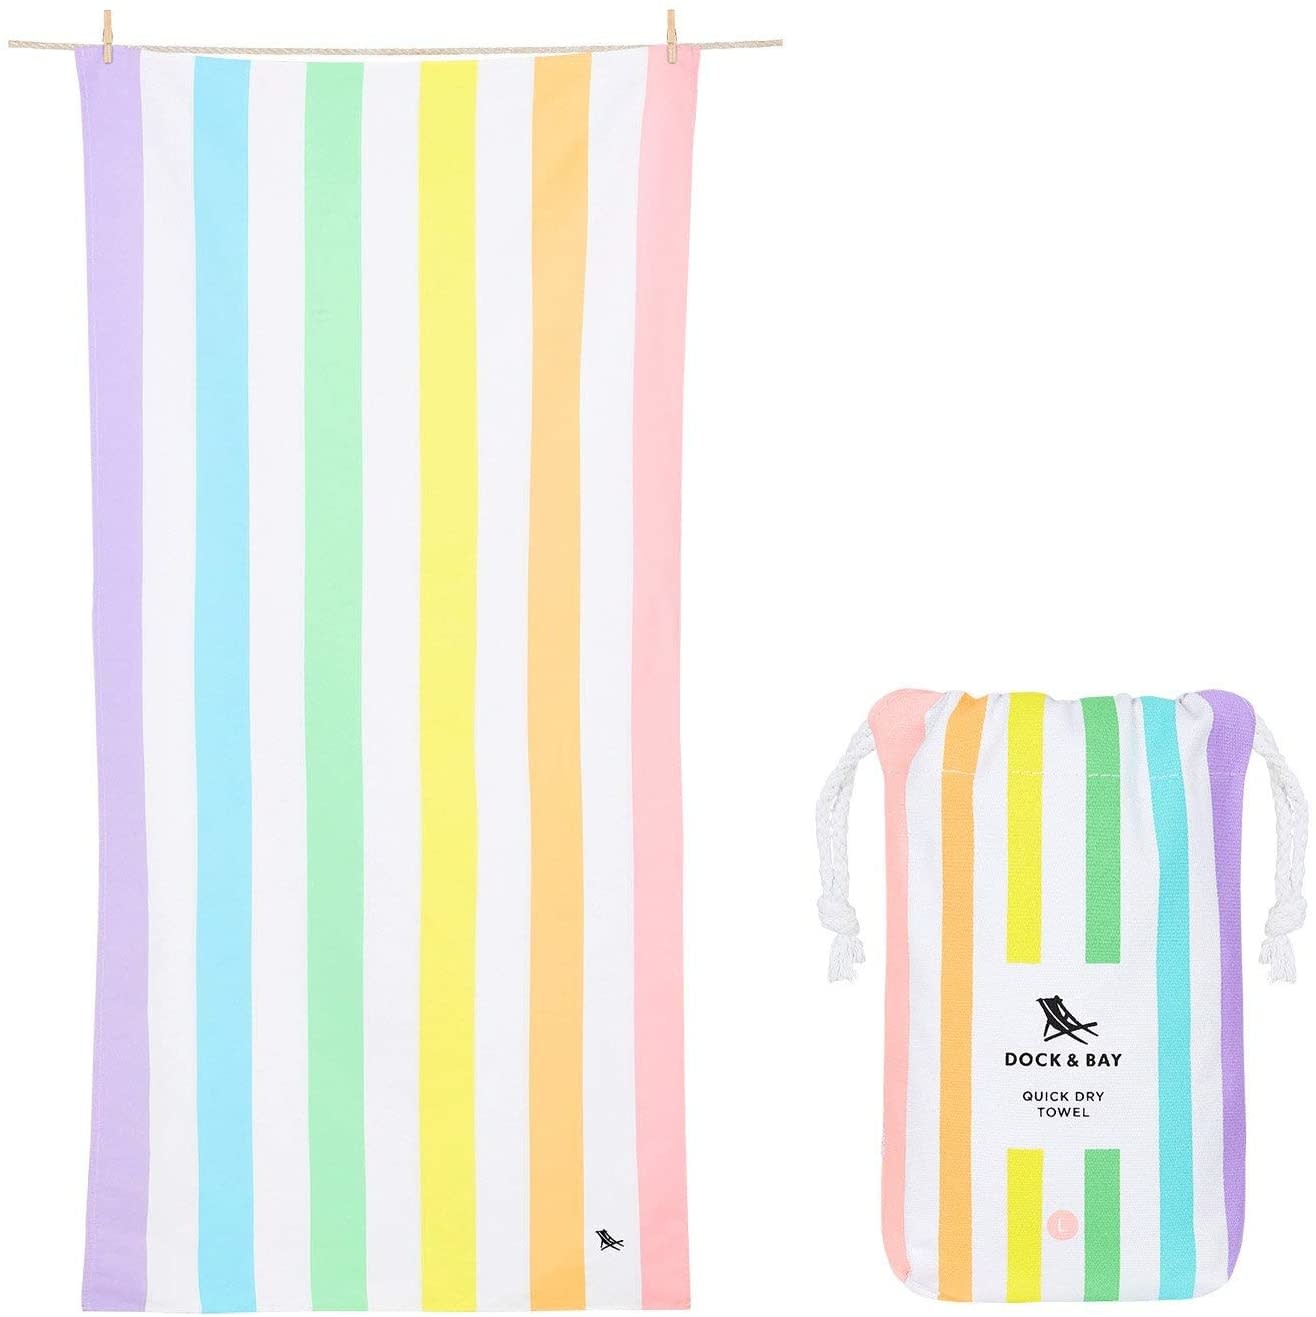 DOCK & BAY LARGE QUICK DRY TOWEL SUMMER 63"X35"